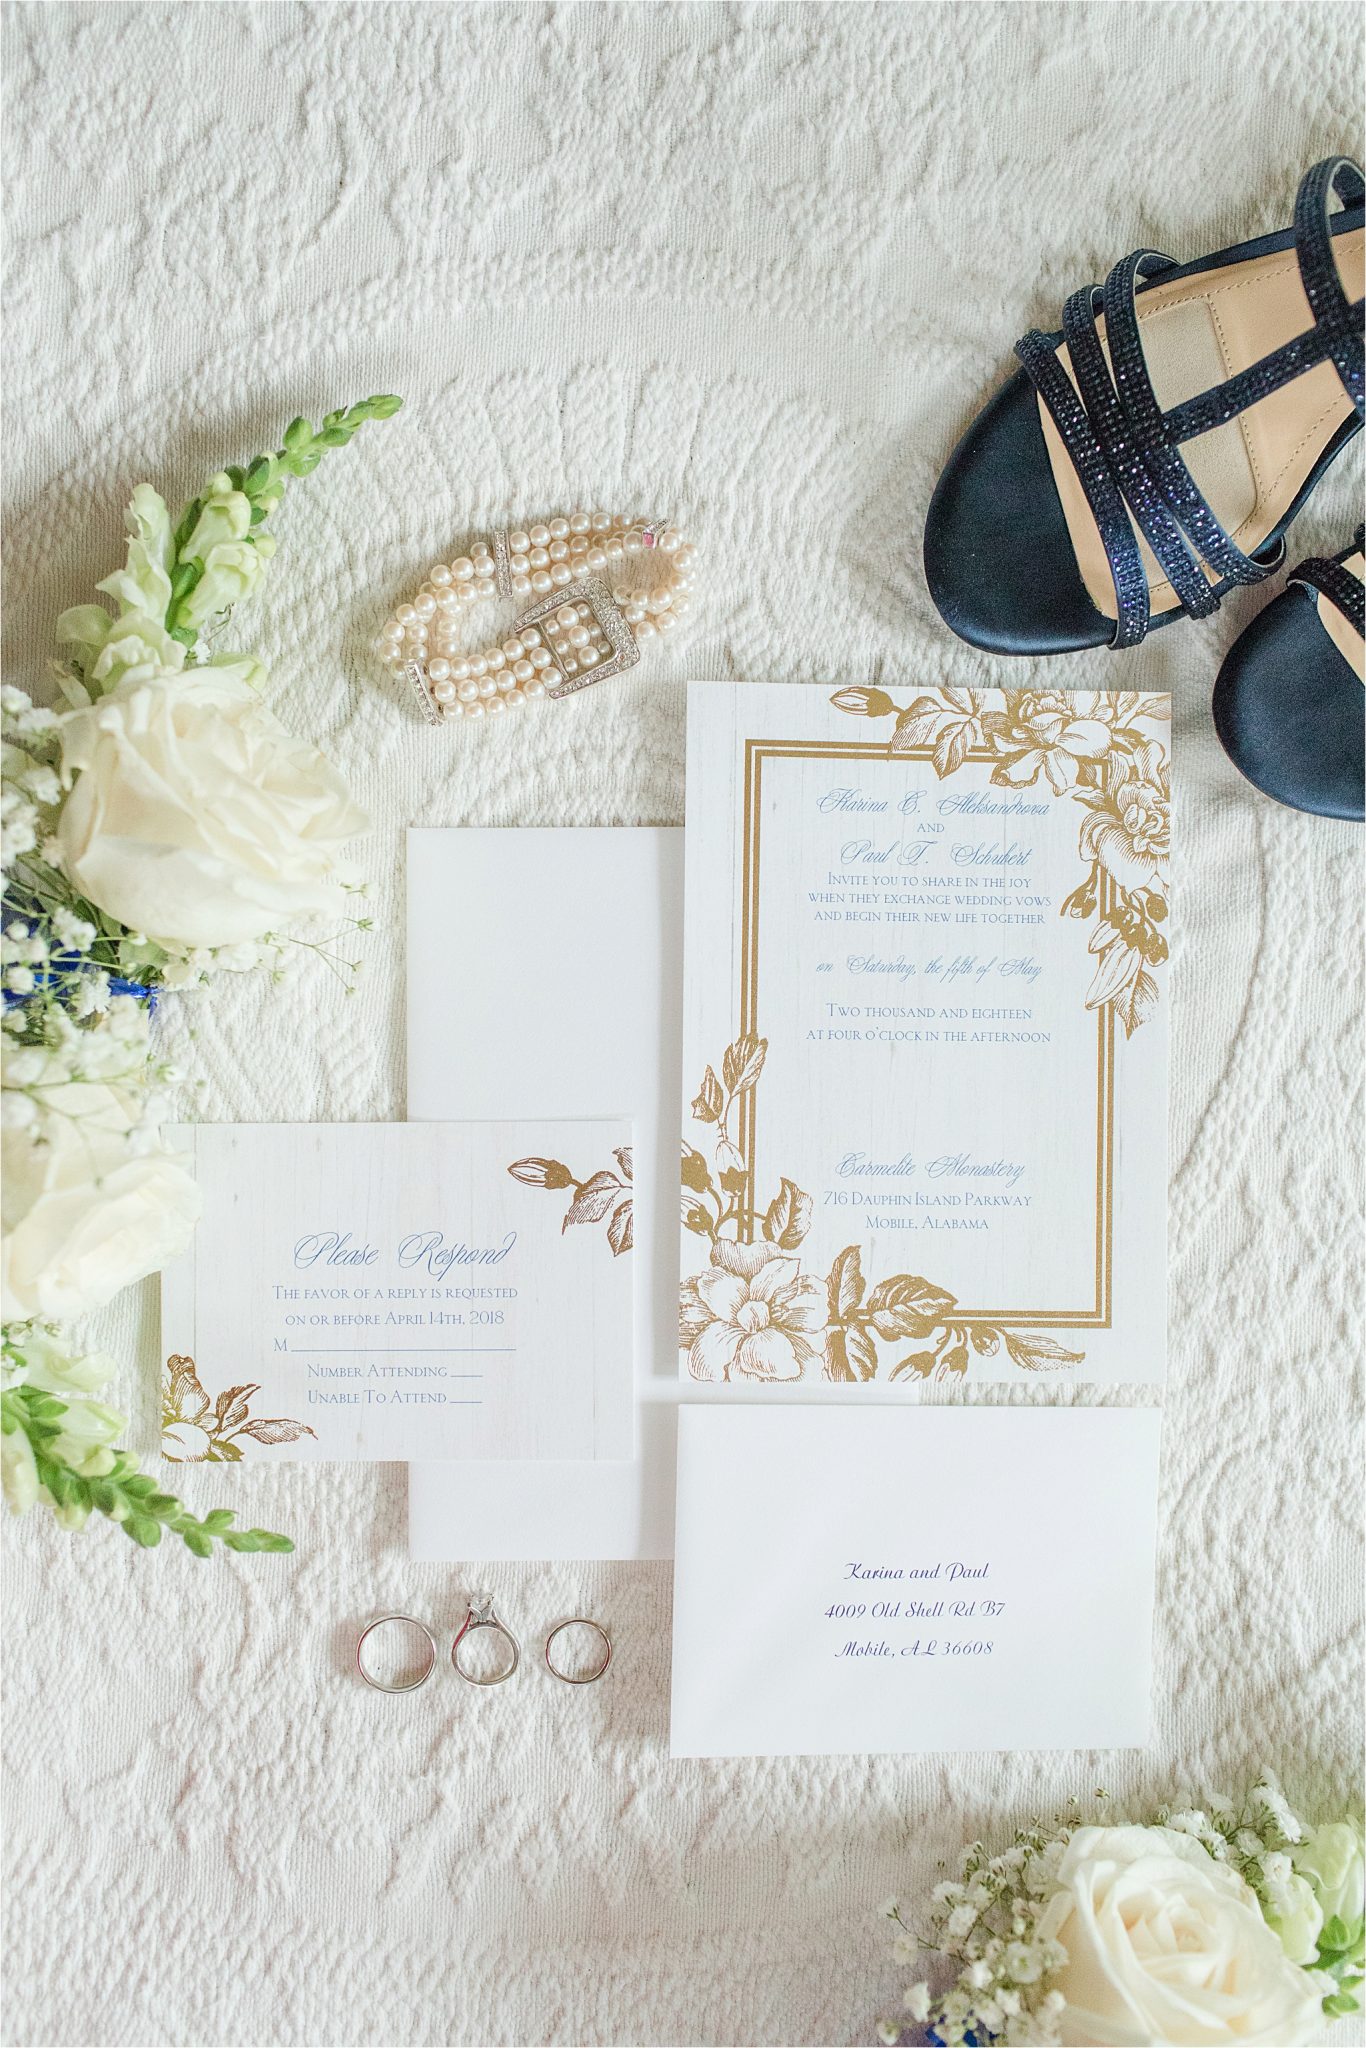 Gold accent-floral-invitaions-details-something blue-pearl bridal jewelry-white rose details